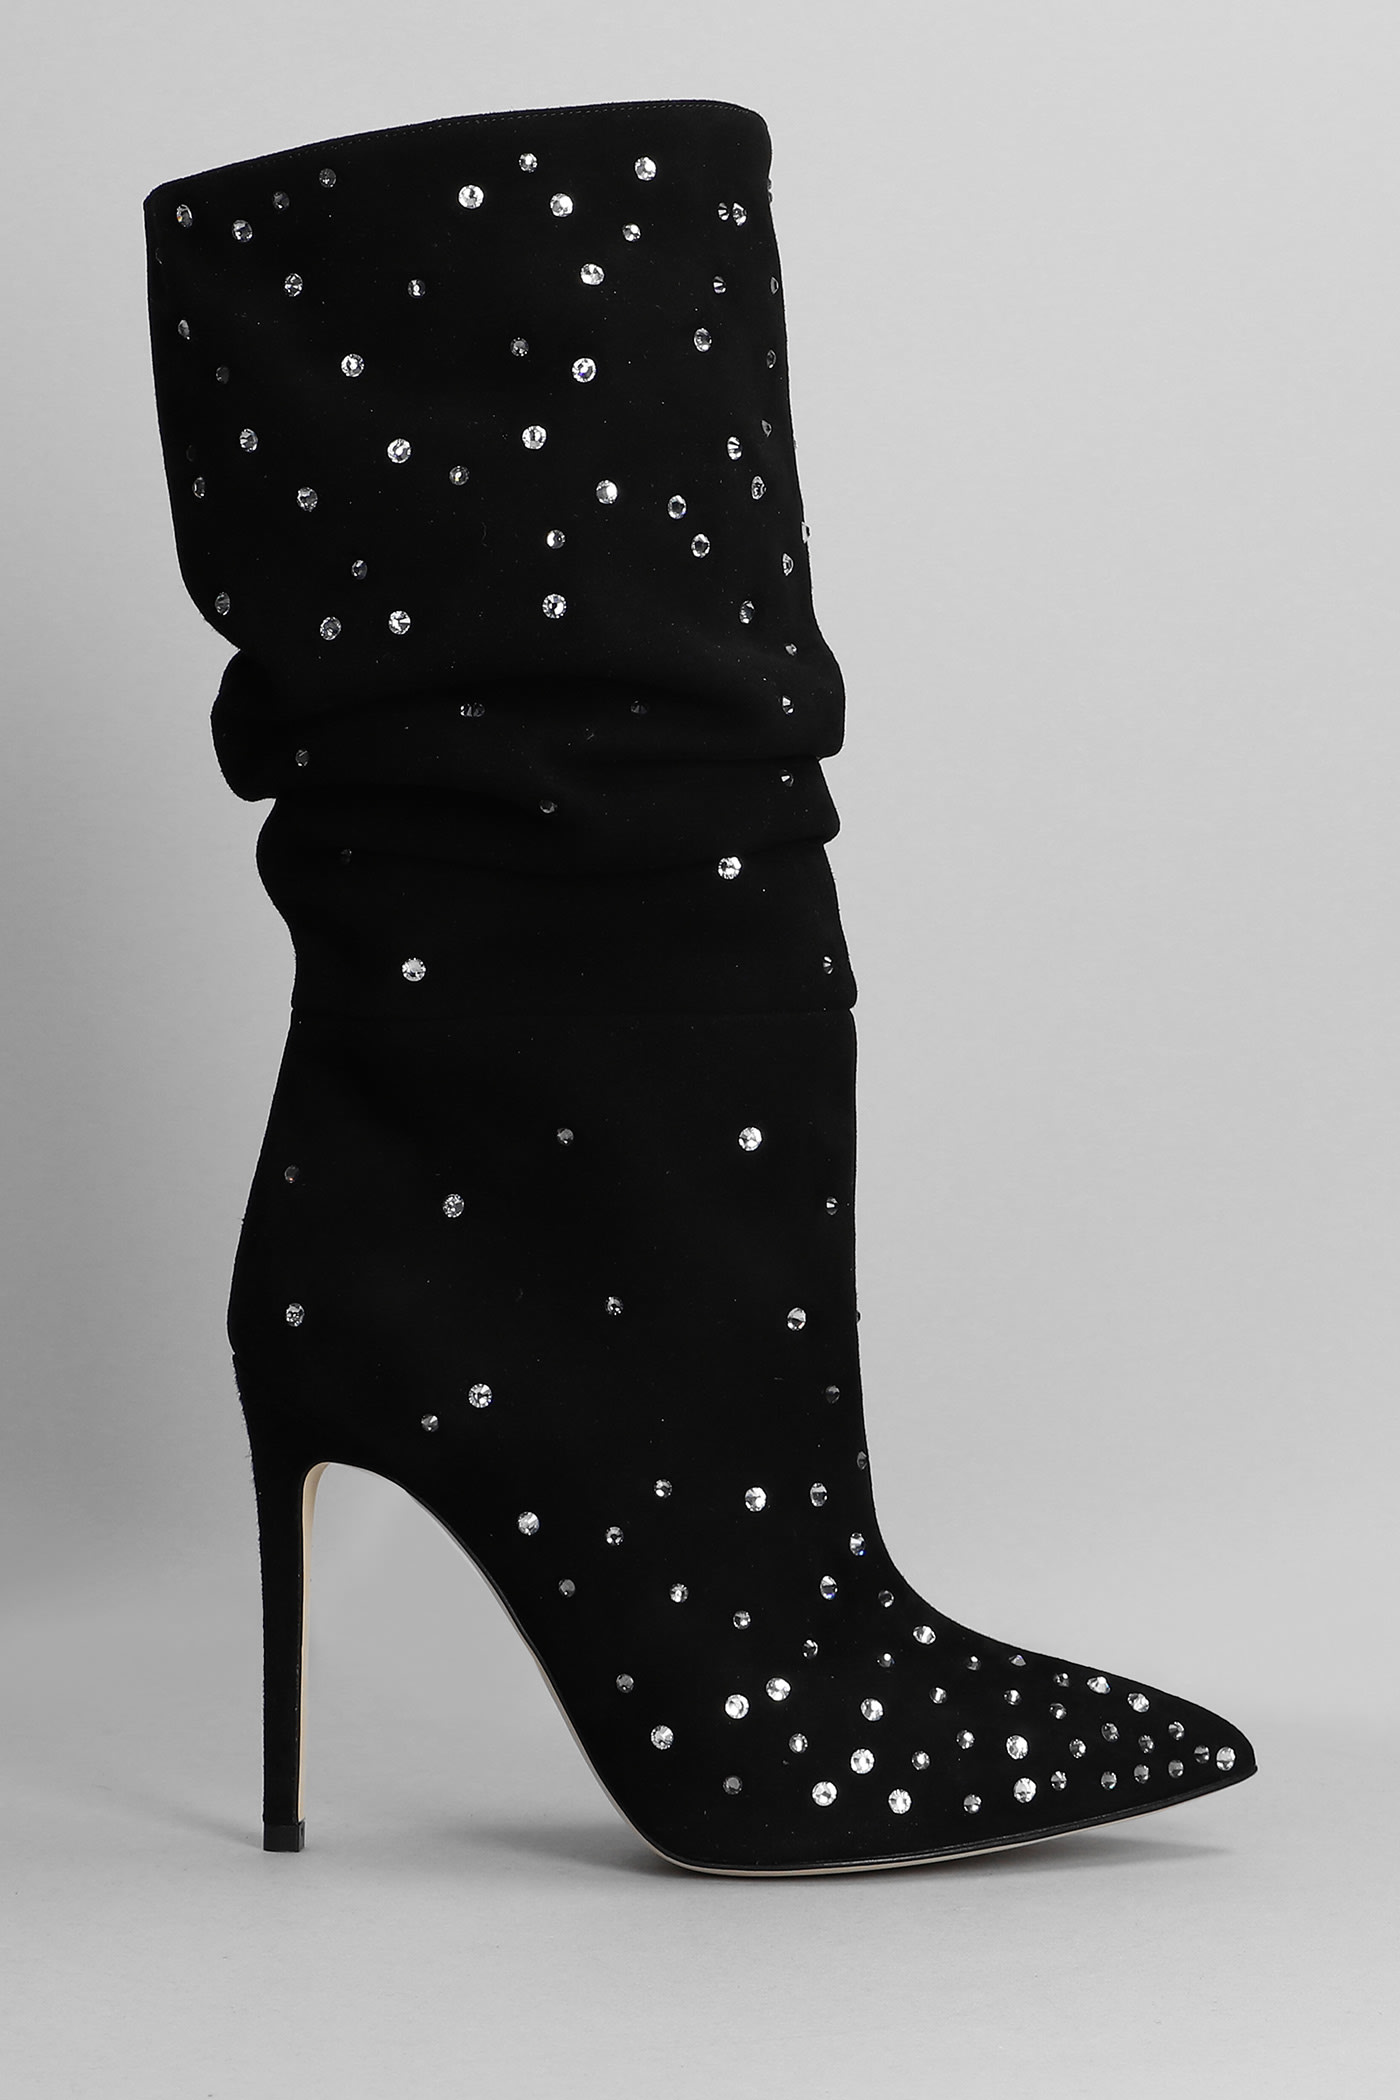 Paris Texas Holly High Heels Ankle Boots In Black Suede